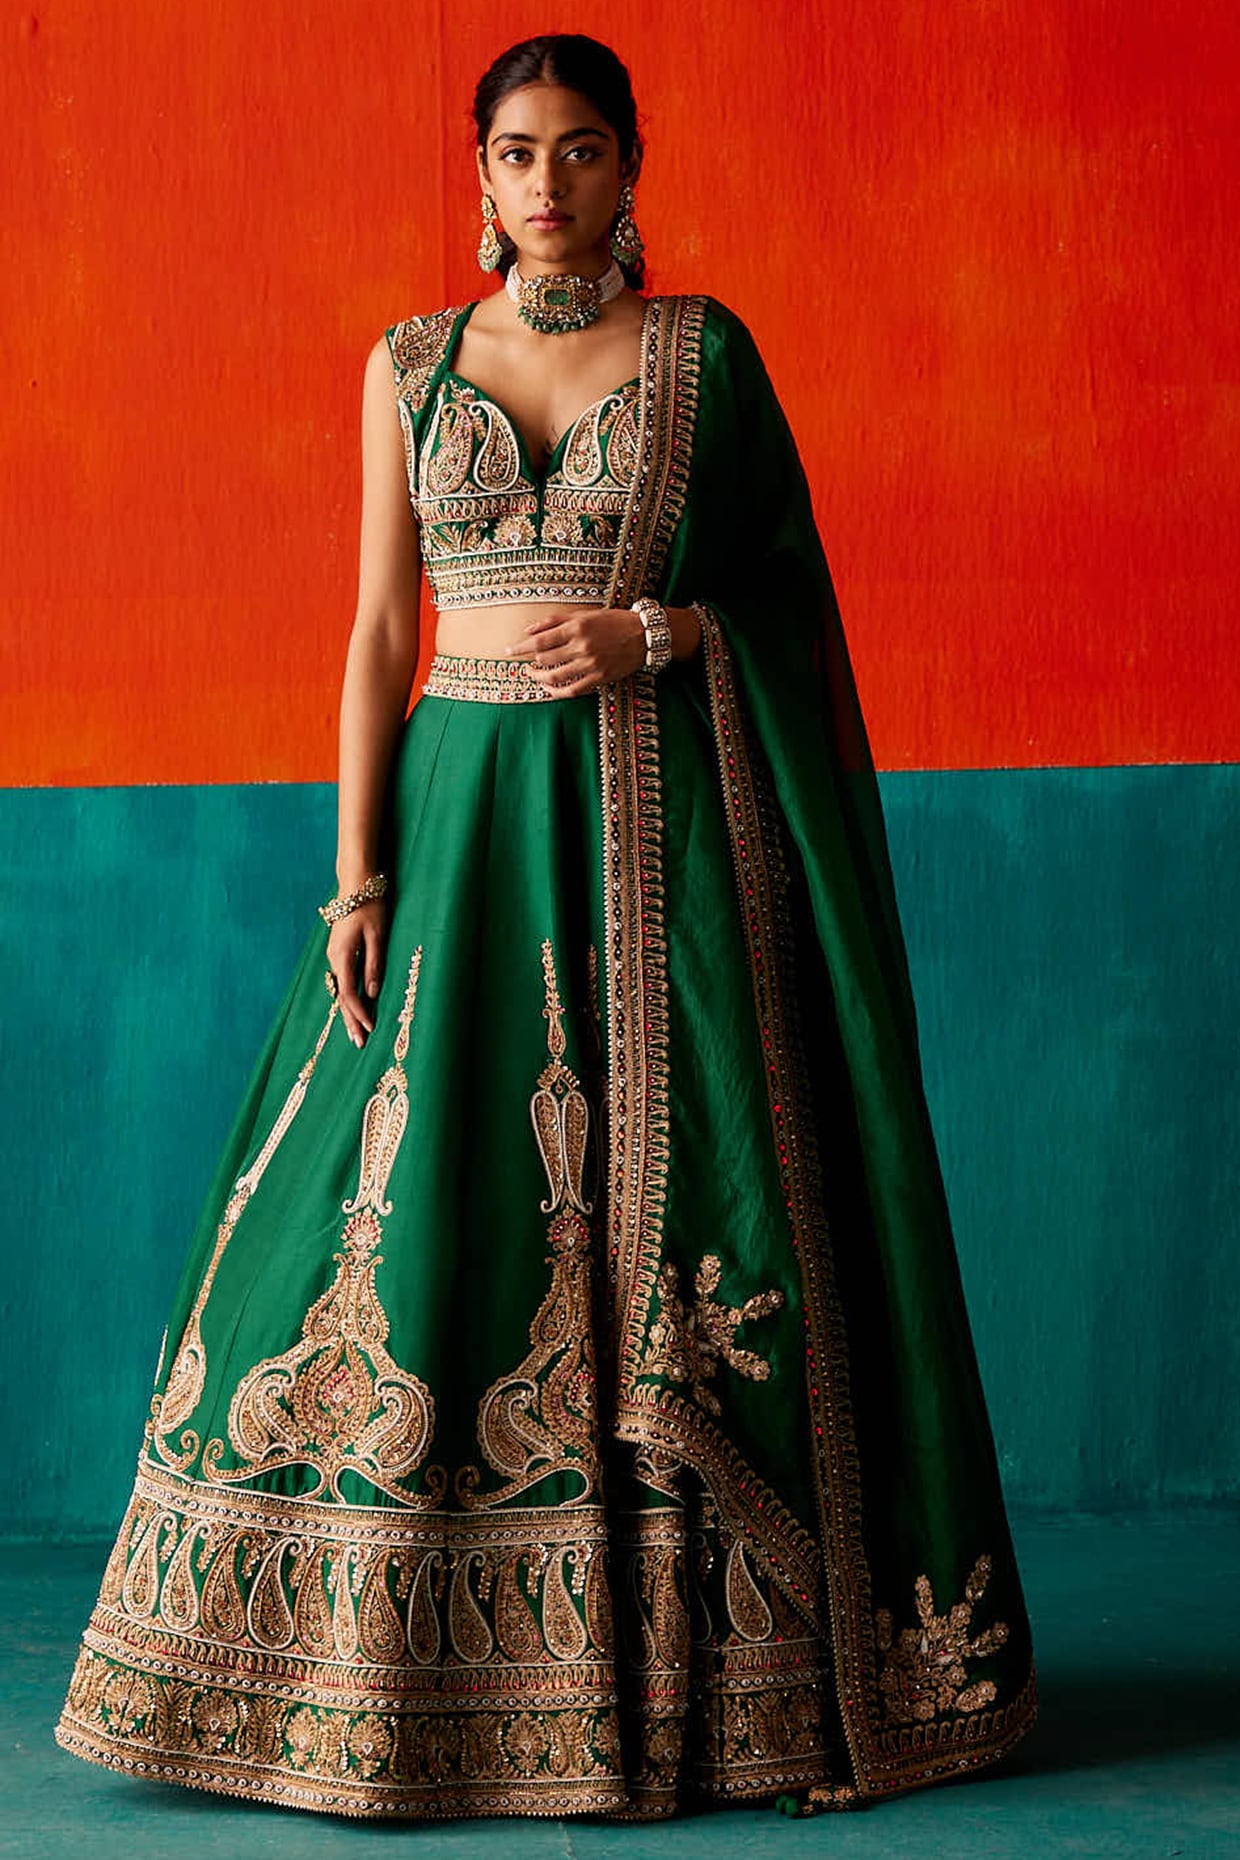 21 Rajasthani Lehenga Trends That Will Rule This Year